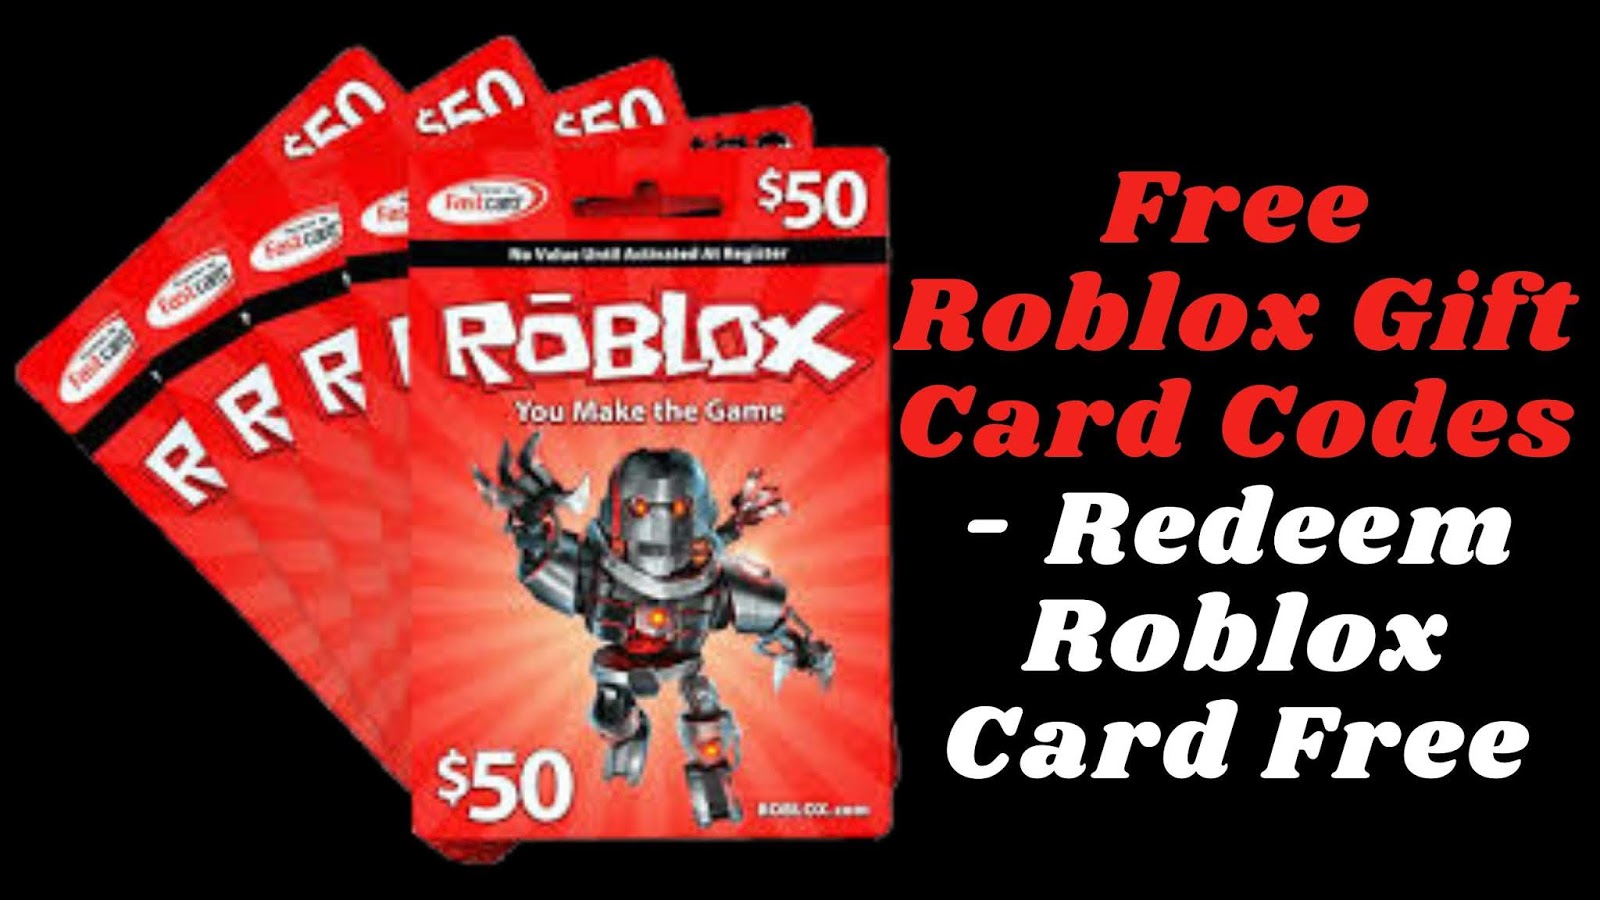 Free Gift Cards Free Roblox Gift Card Codes Redeem Roblox Card Free - code robux gift cards